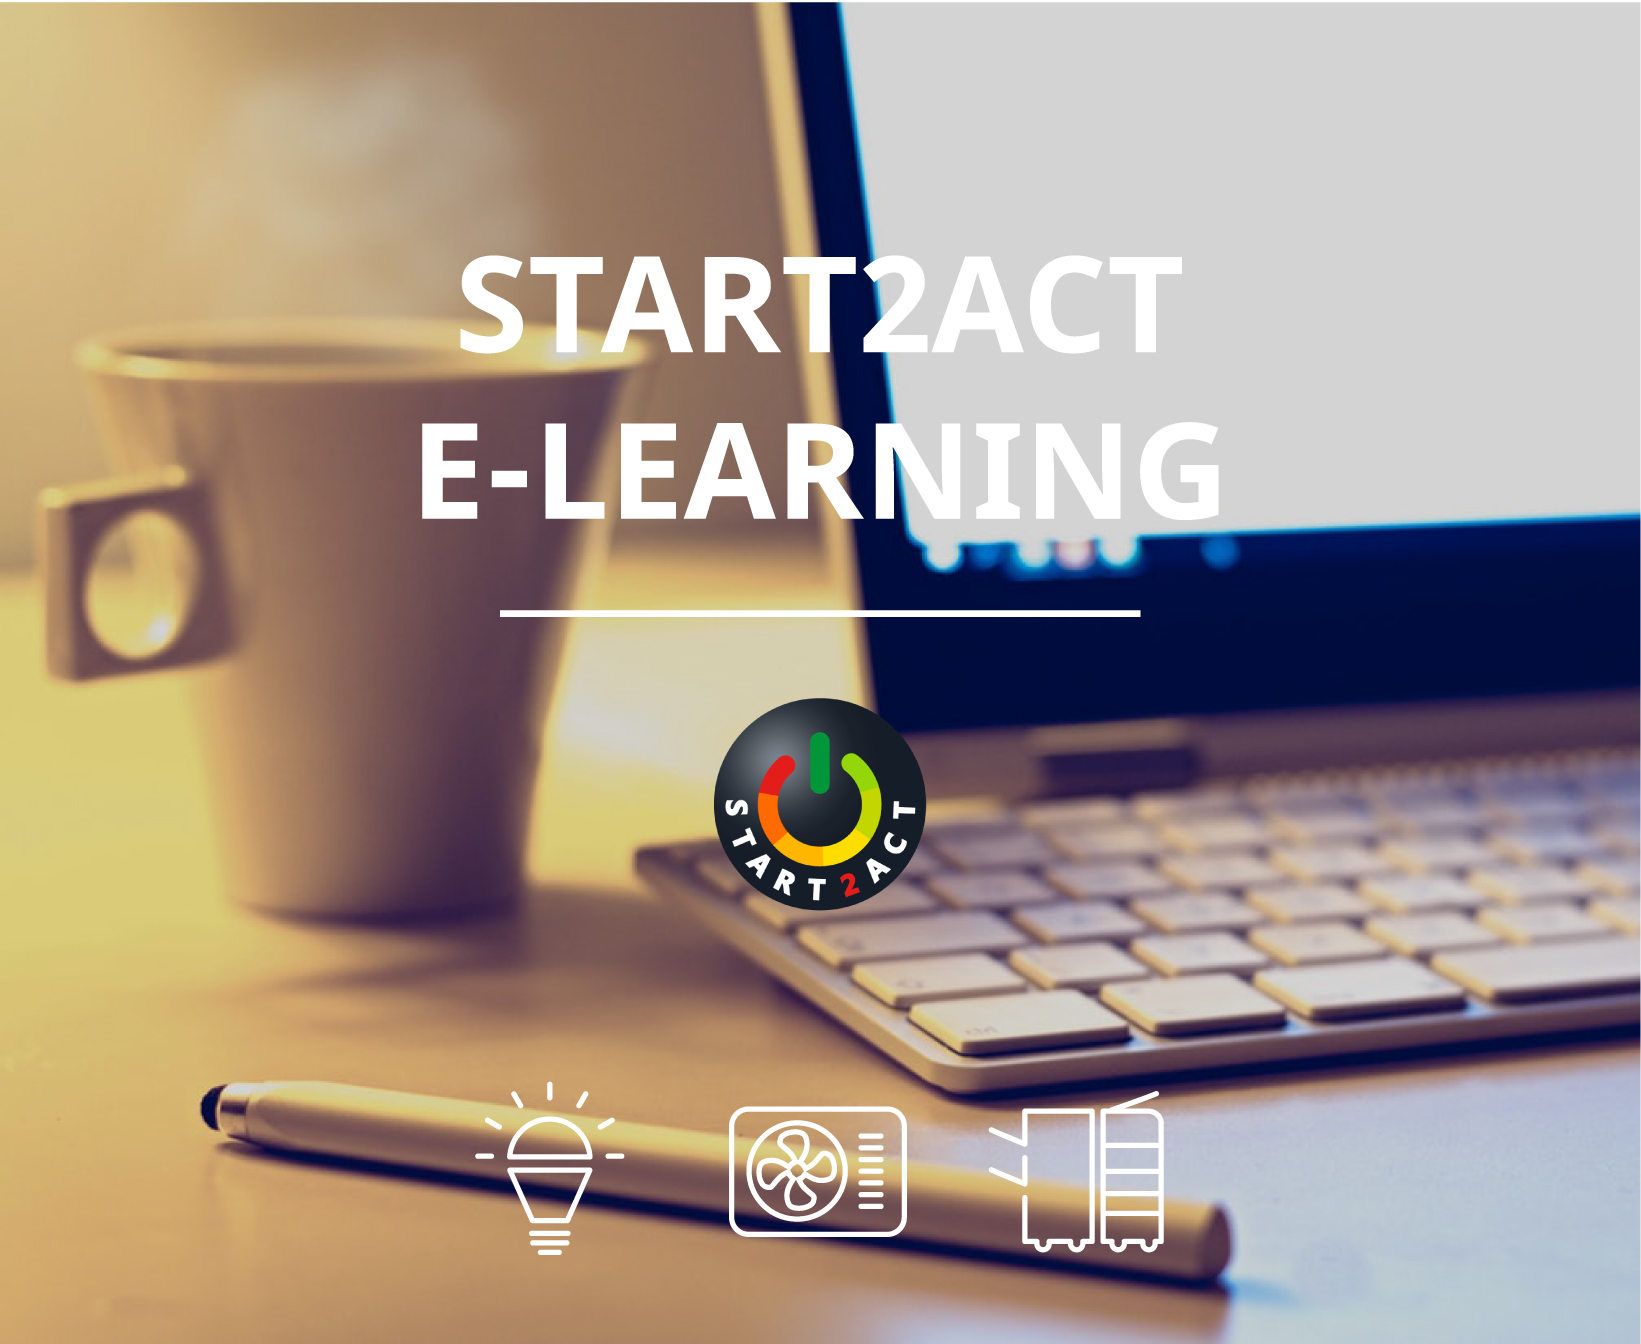 The first full START2ACT E-learning Module is launched!